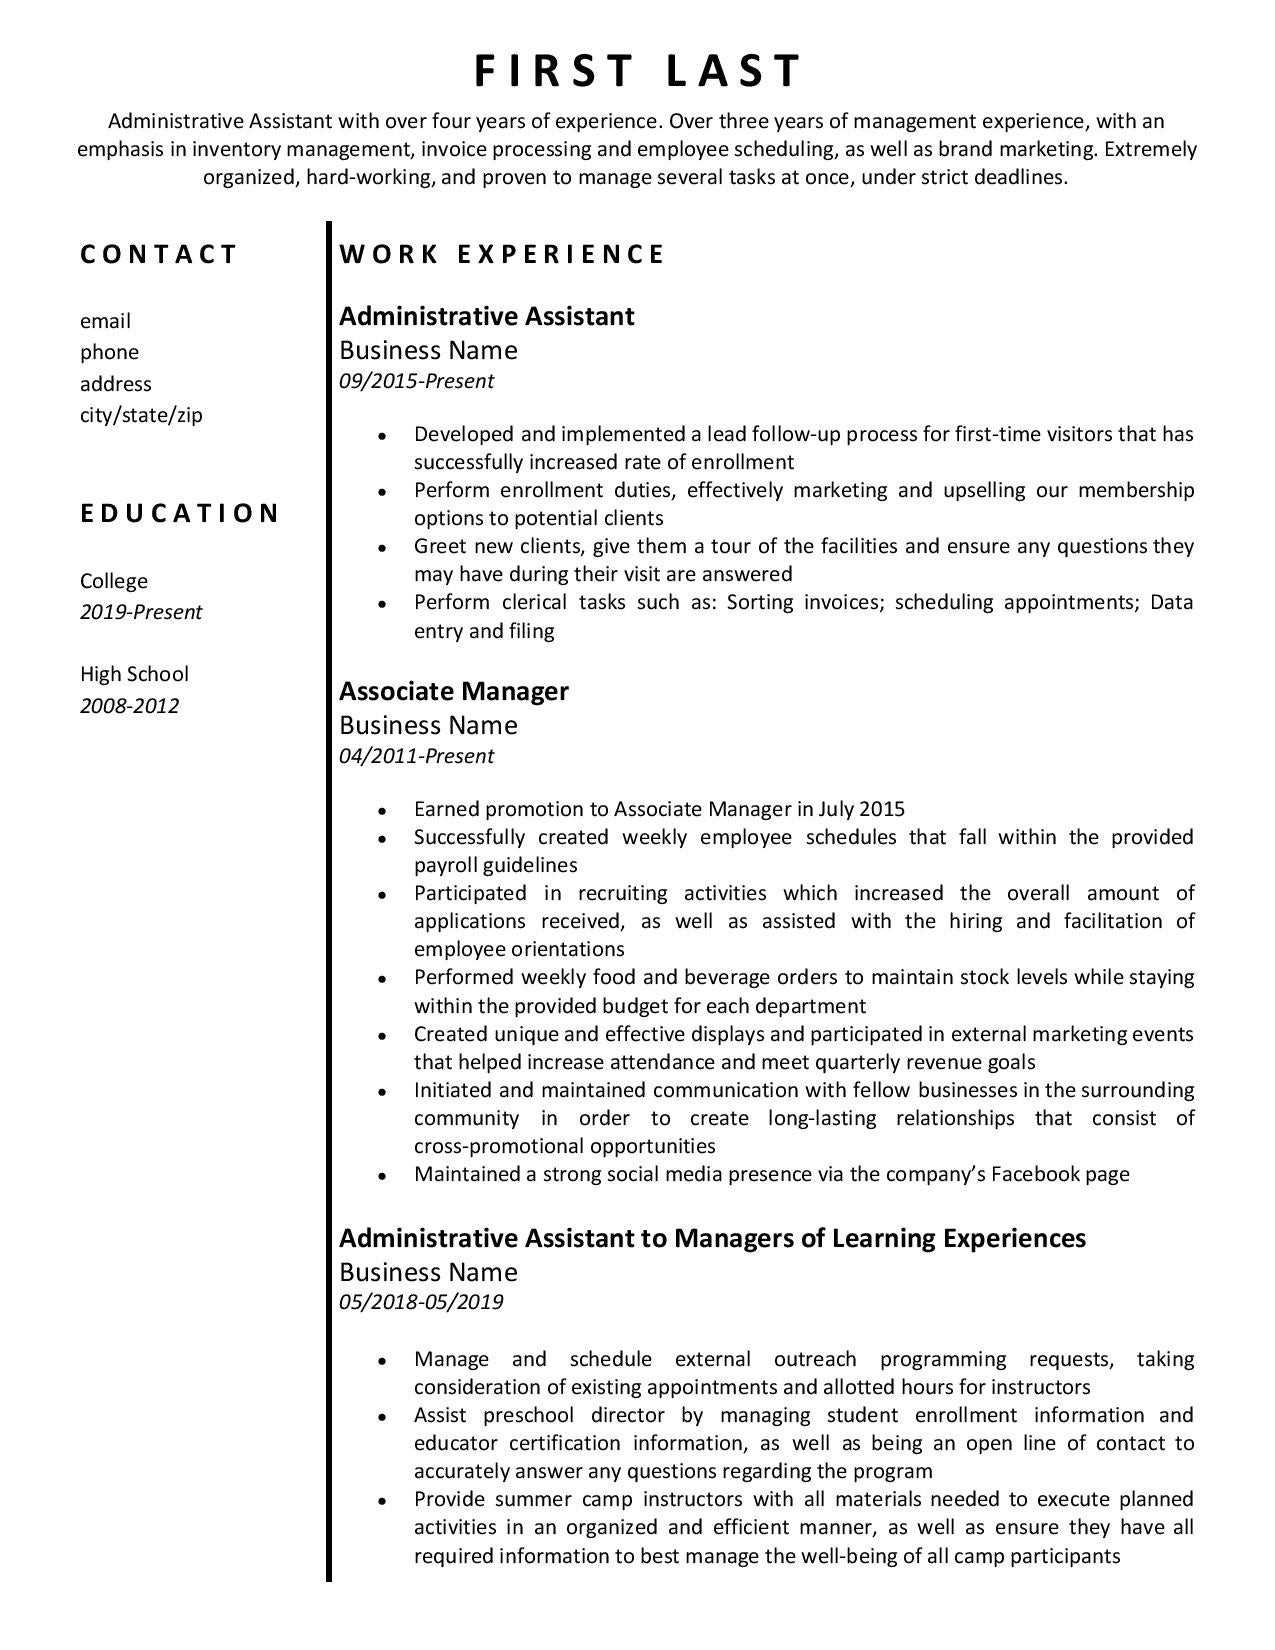 Resume Template Multiple Positions Same Company Help! – Multiple Positions within Same Company and On/off …